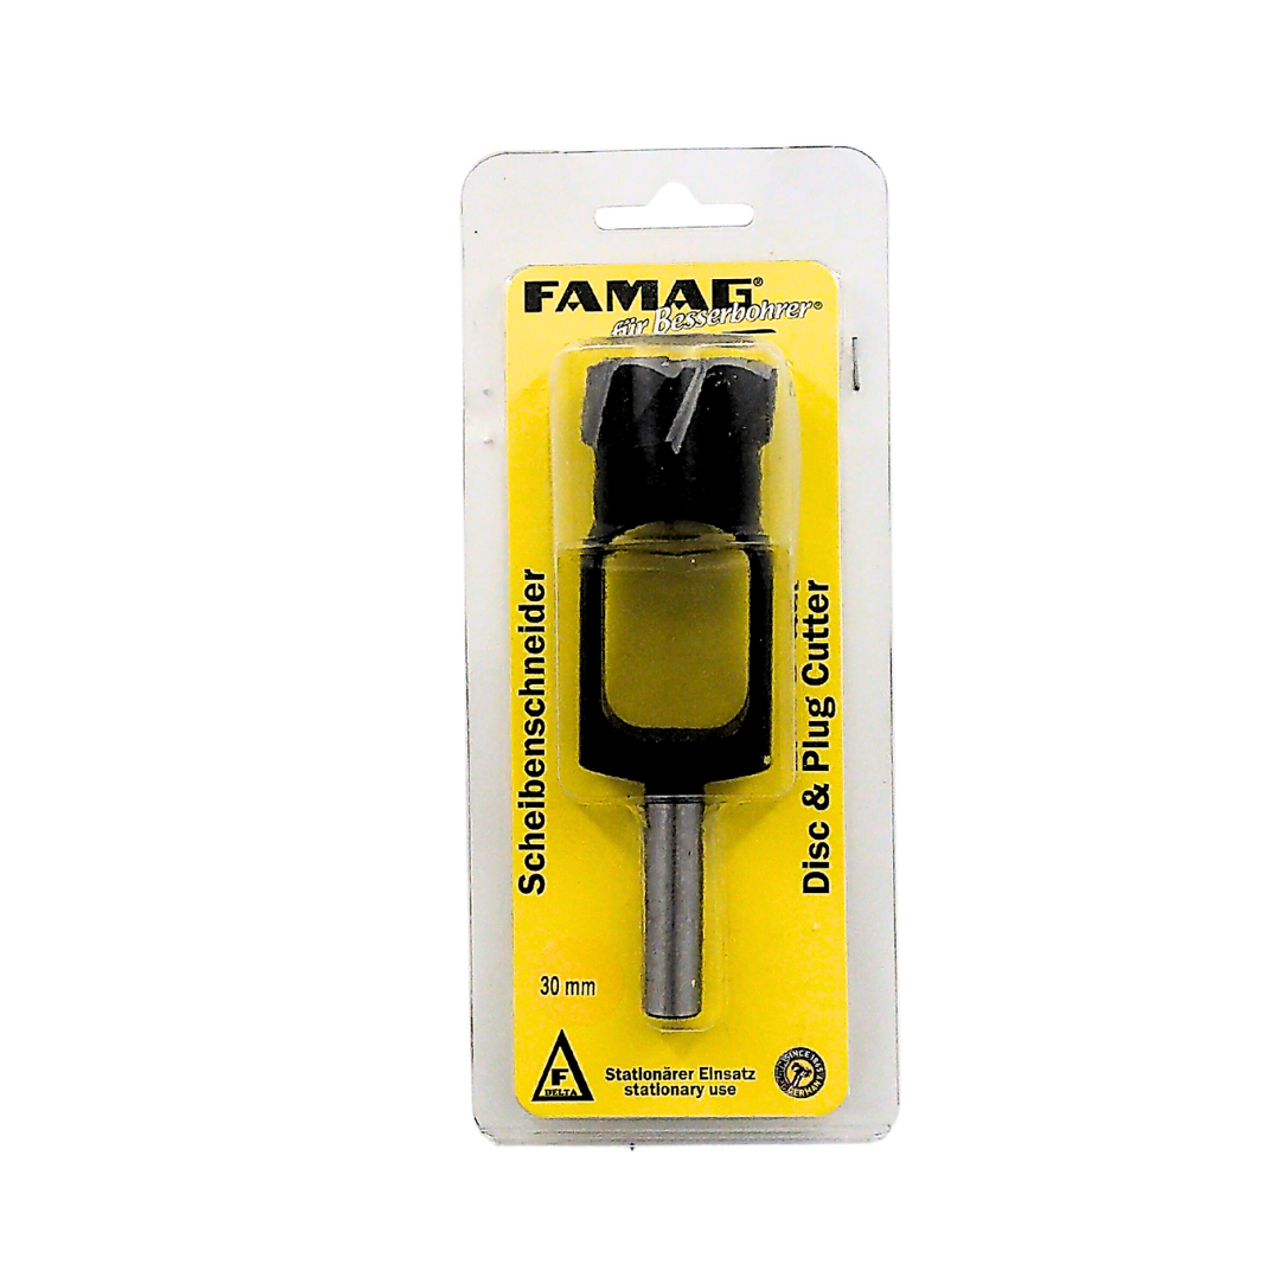 Craftsmen, become a tool titan with a total tools solution for FAMAG 1616 Tool Steel Plug Cutter for Hardwood suitability in Australia and New Zealand